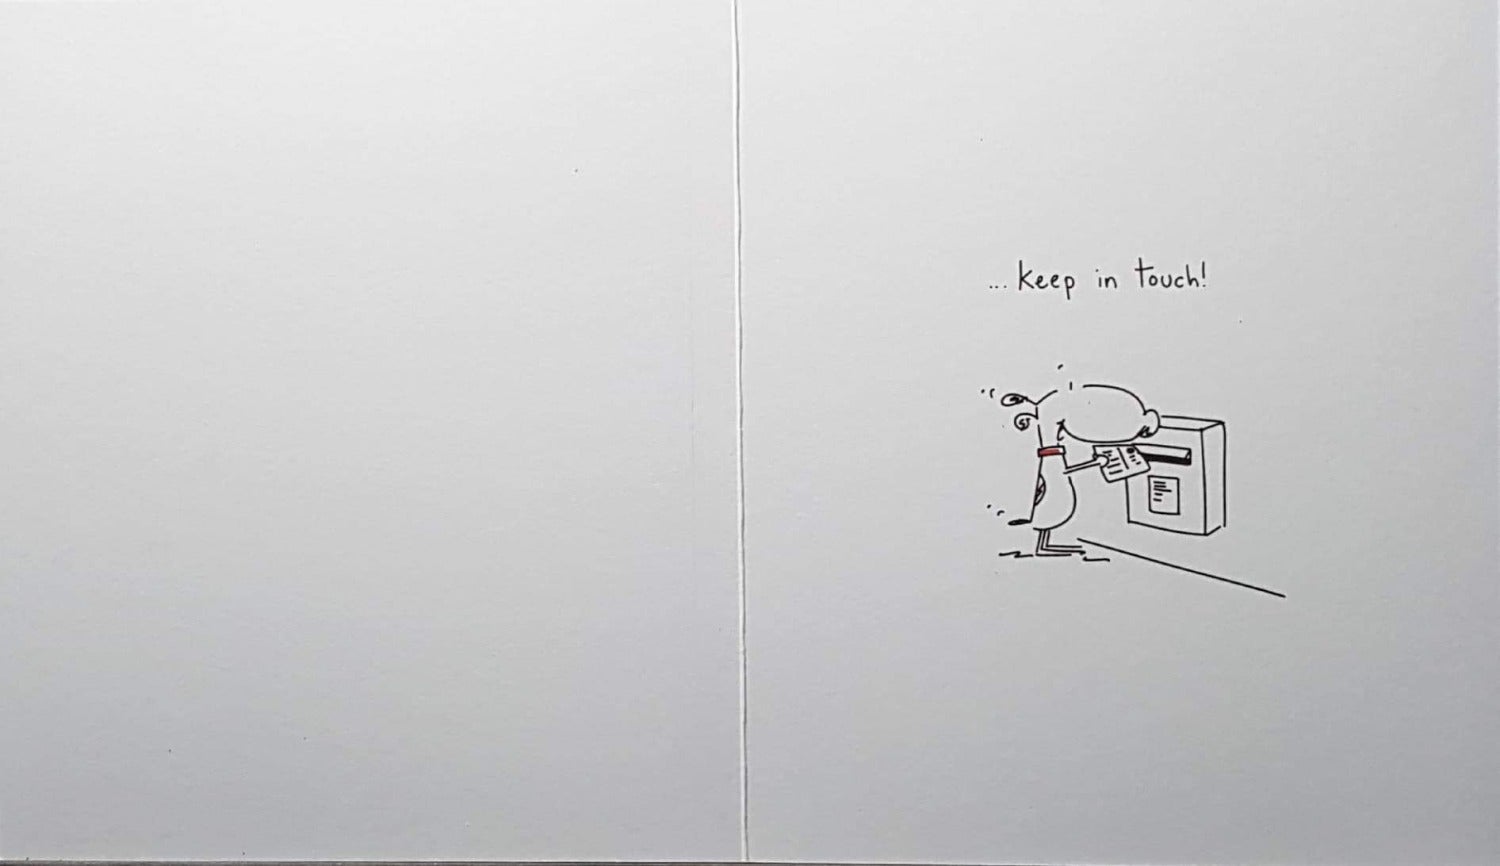 Leaving Card - Goodbye & Dog Carrying Red Dotted Sack